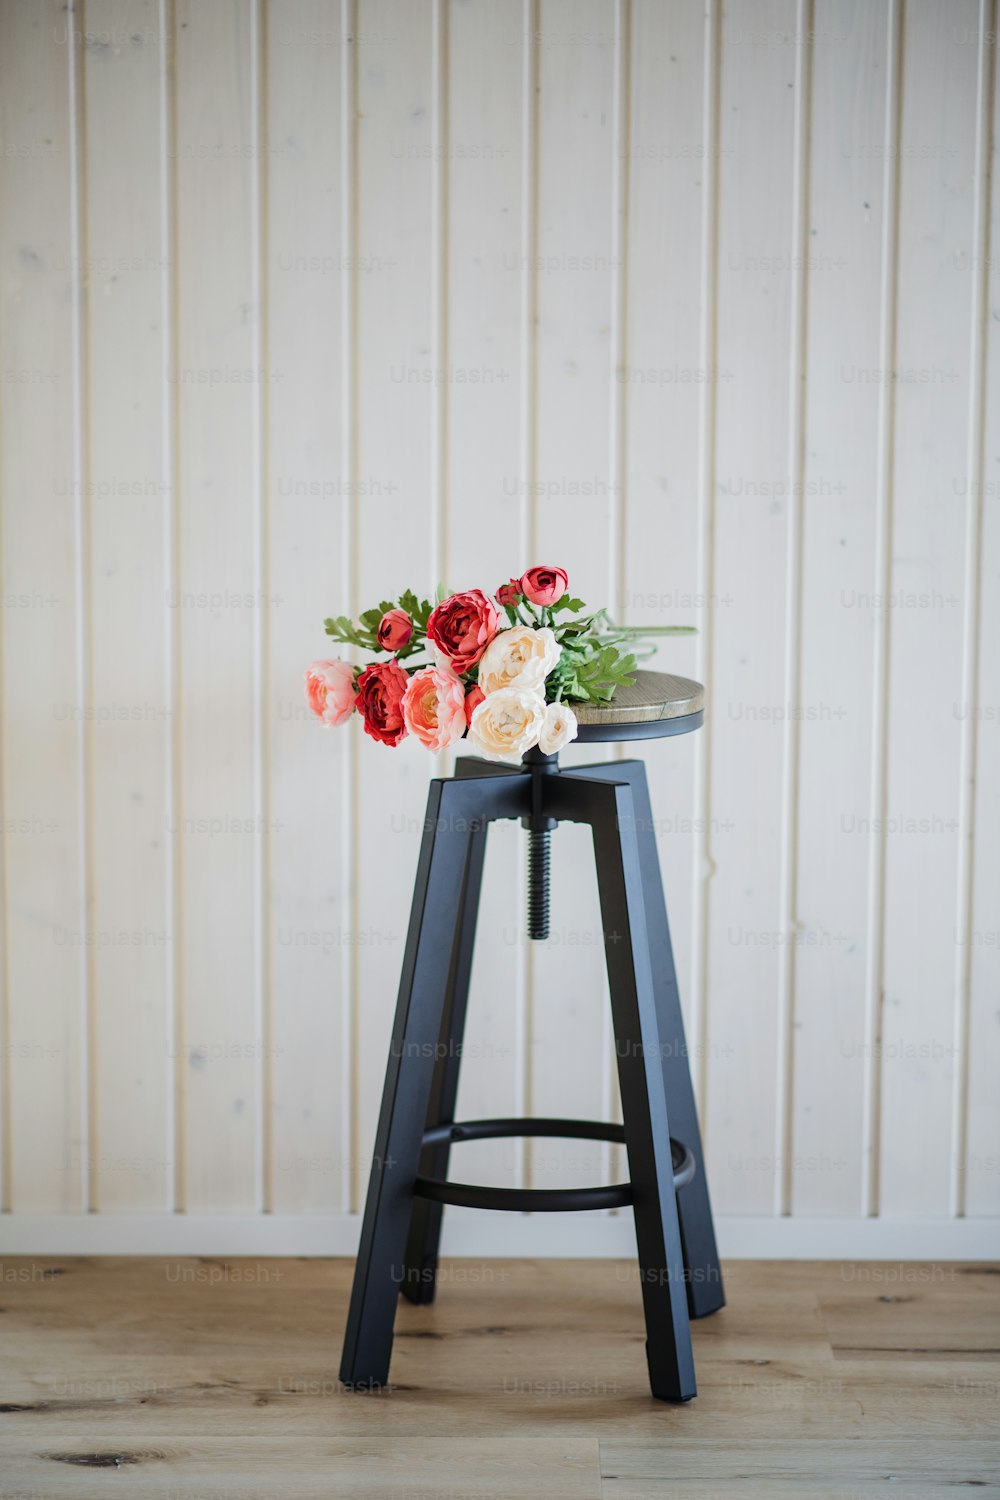 A bouquet of flowers on wooden stool against white background wall. Copy space.